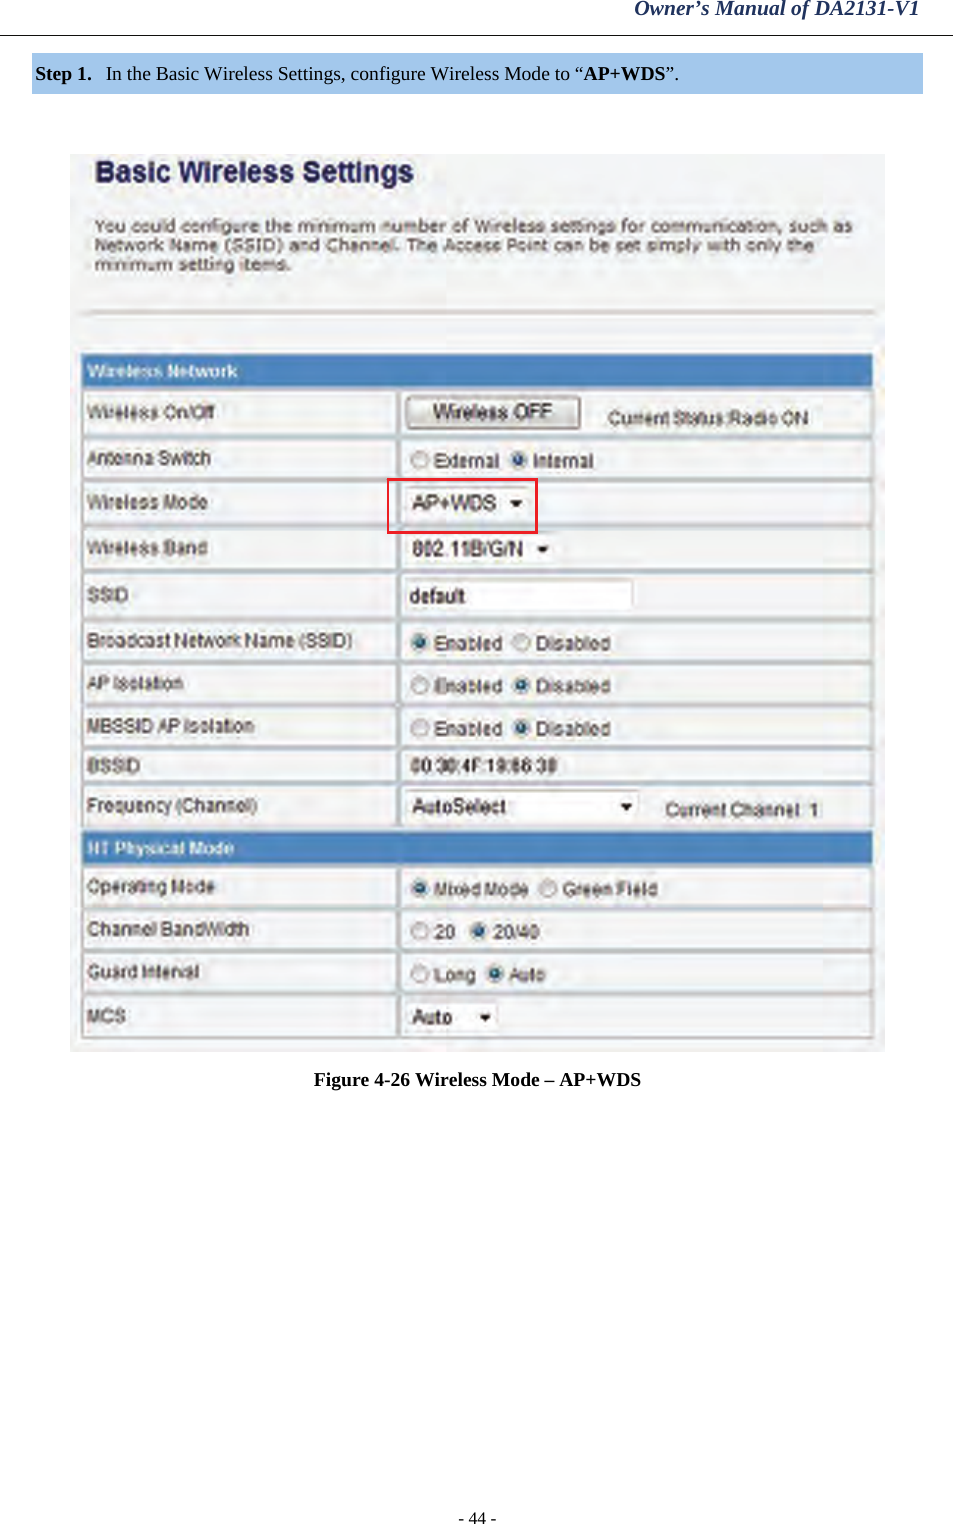 Owner’s Manual of DA2131-V1 - 44 - Step 1. In the Basic Wireless Settings, configure Wireless Mode to “AP+WDS”.    Figure 4-26 Wireless Mode – AP+WDS  